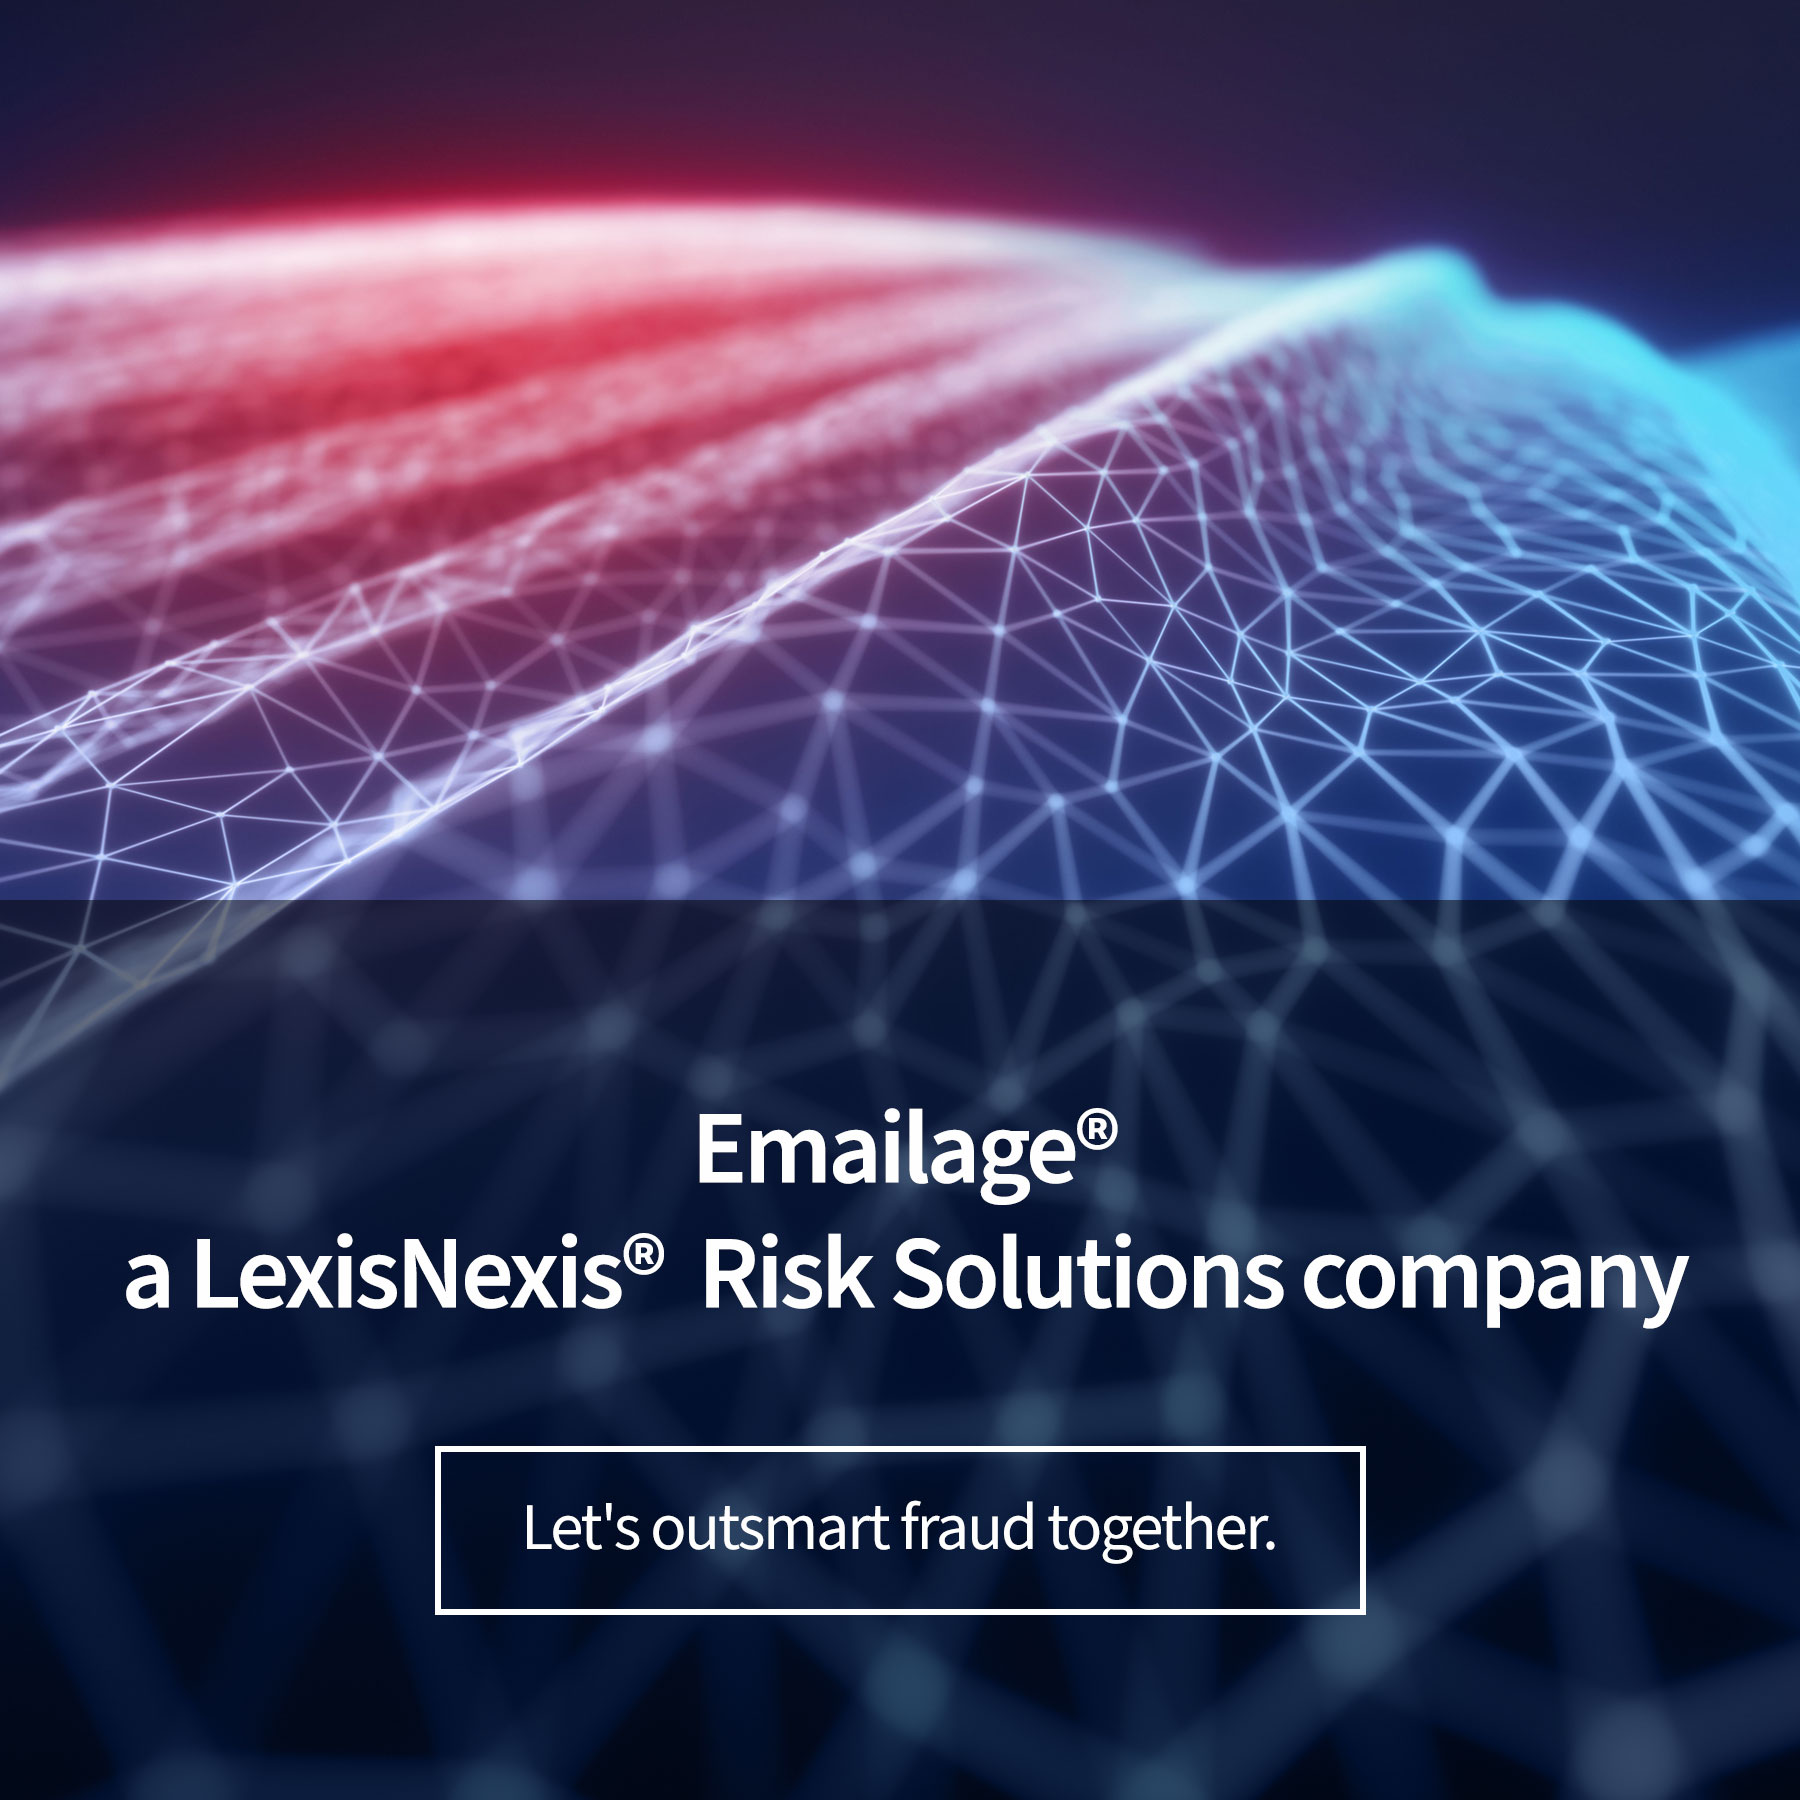 Emailage® a LexisNexis® Risk Solutions company Let's outsmart fraud together